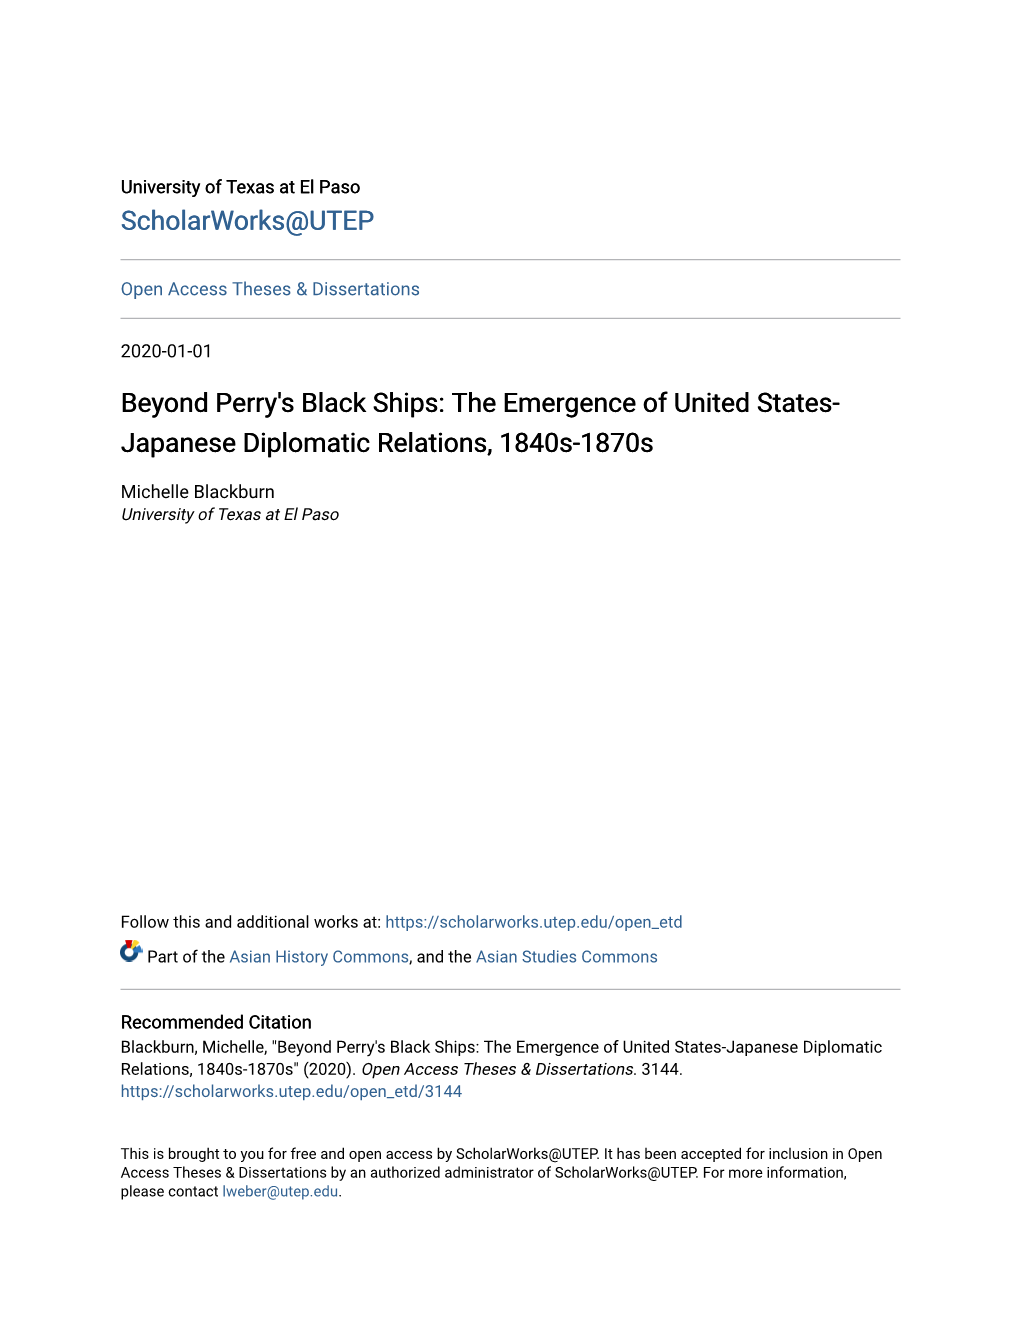 Beyond Perry's Black Ships: the Emergence of United States- Japanese Diplomatic Relations, 1840S-1870S